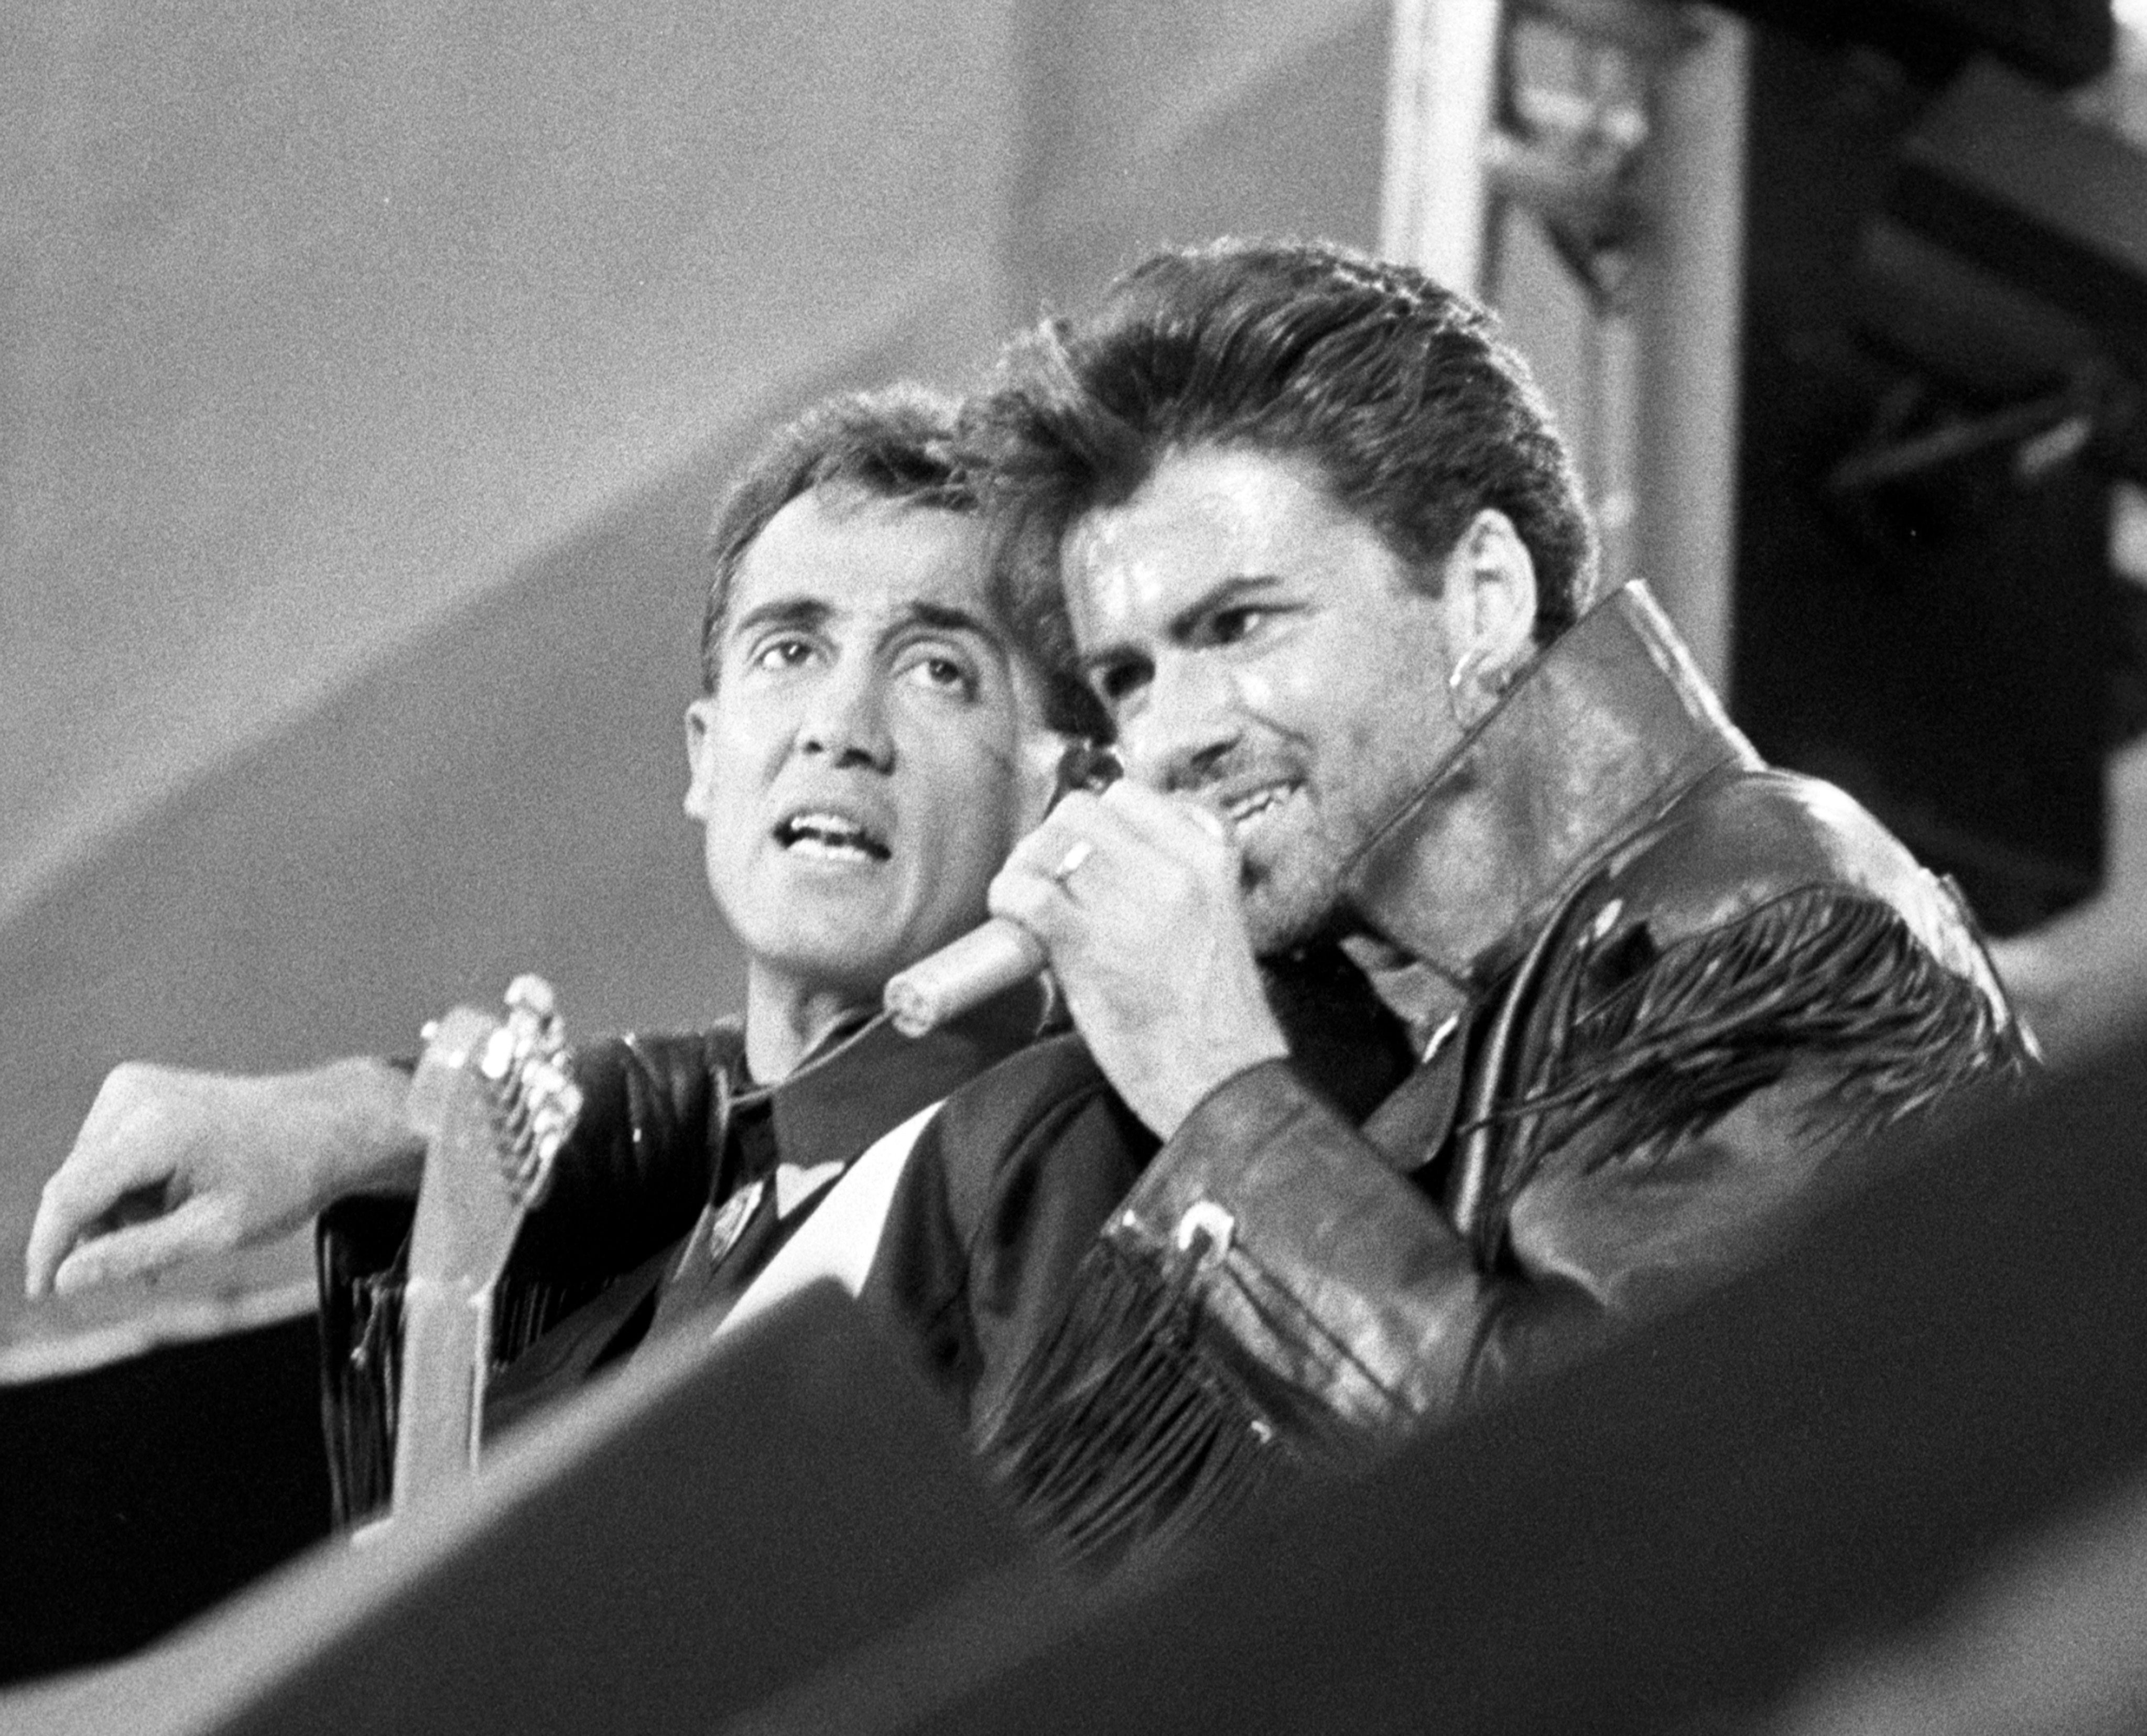 Ridgeley (left) and Michael on stage in 1986